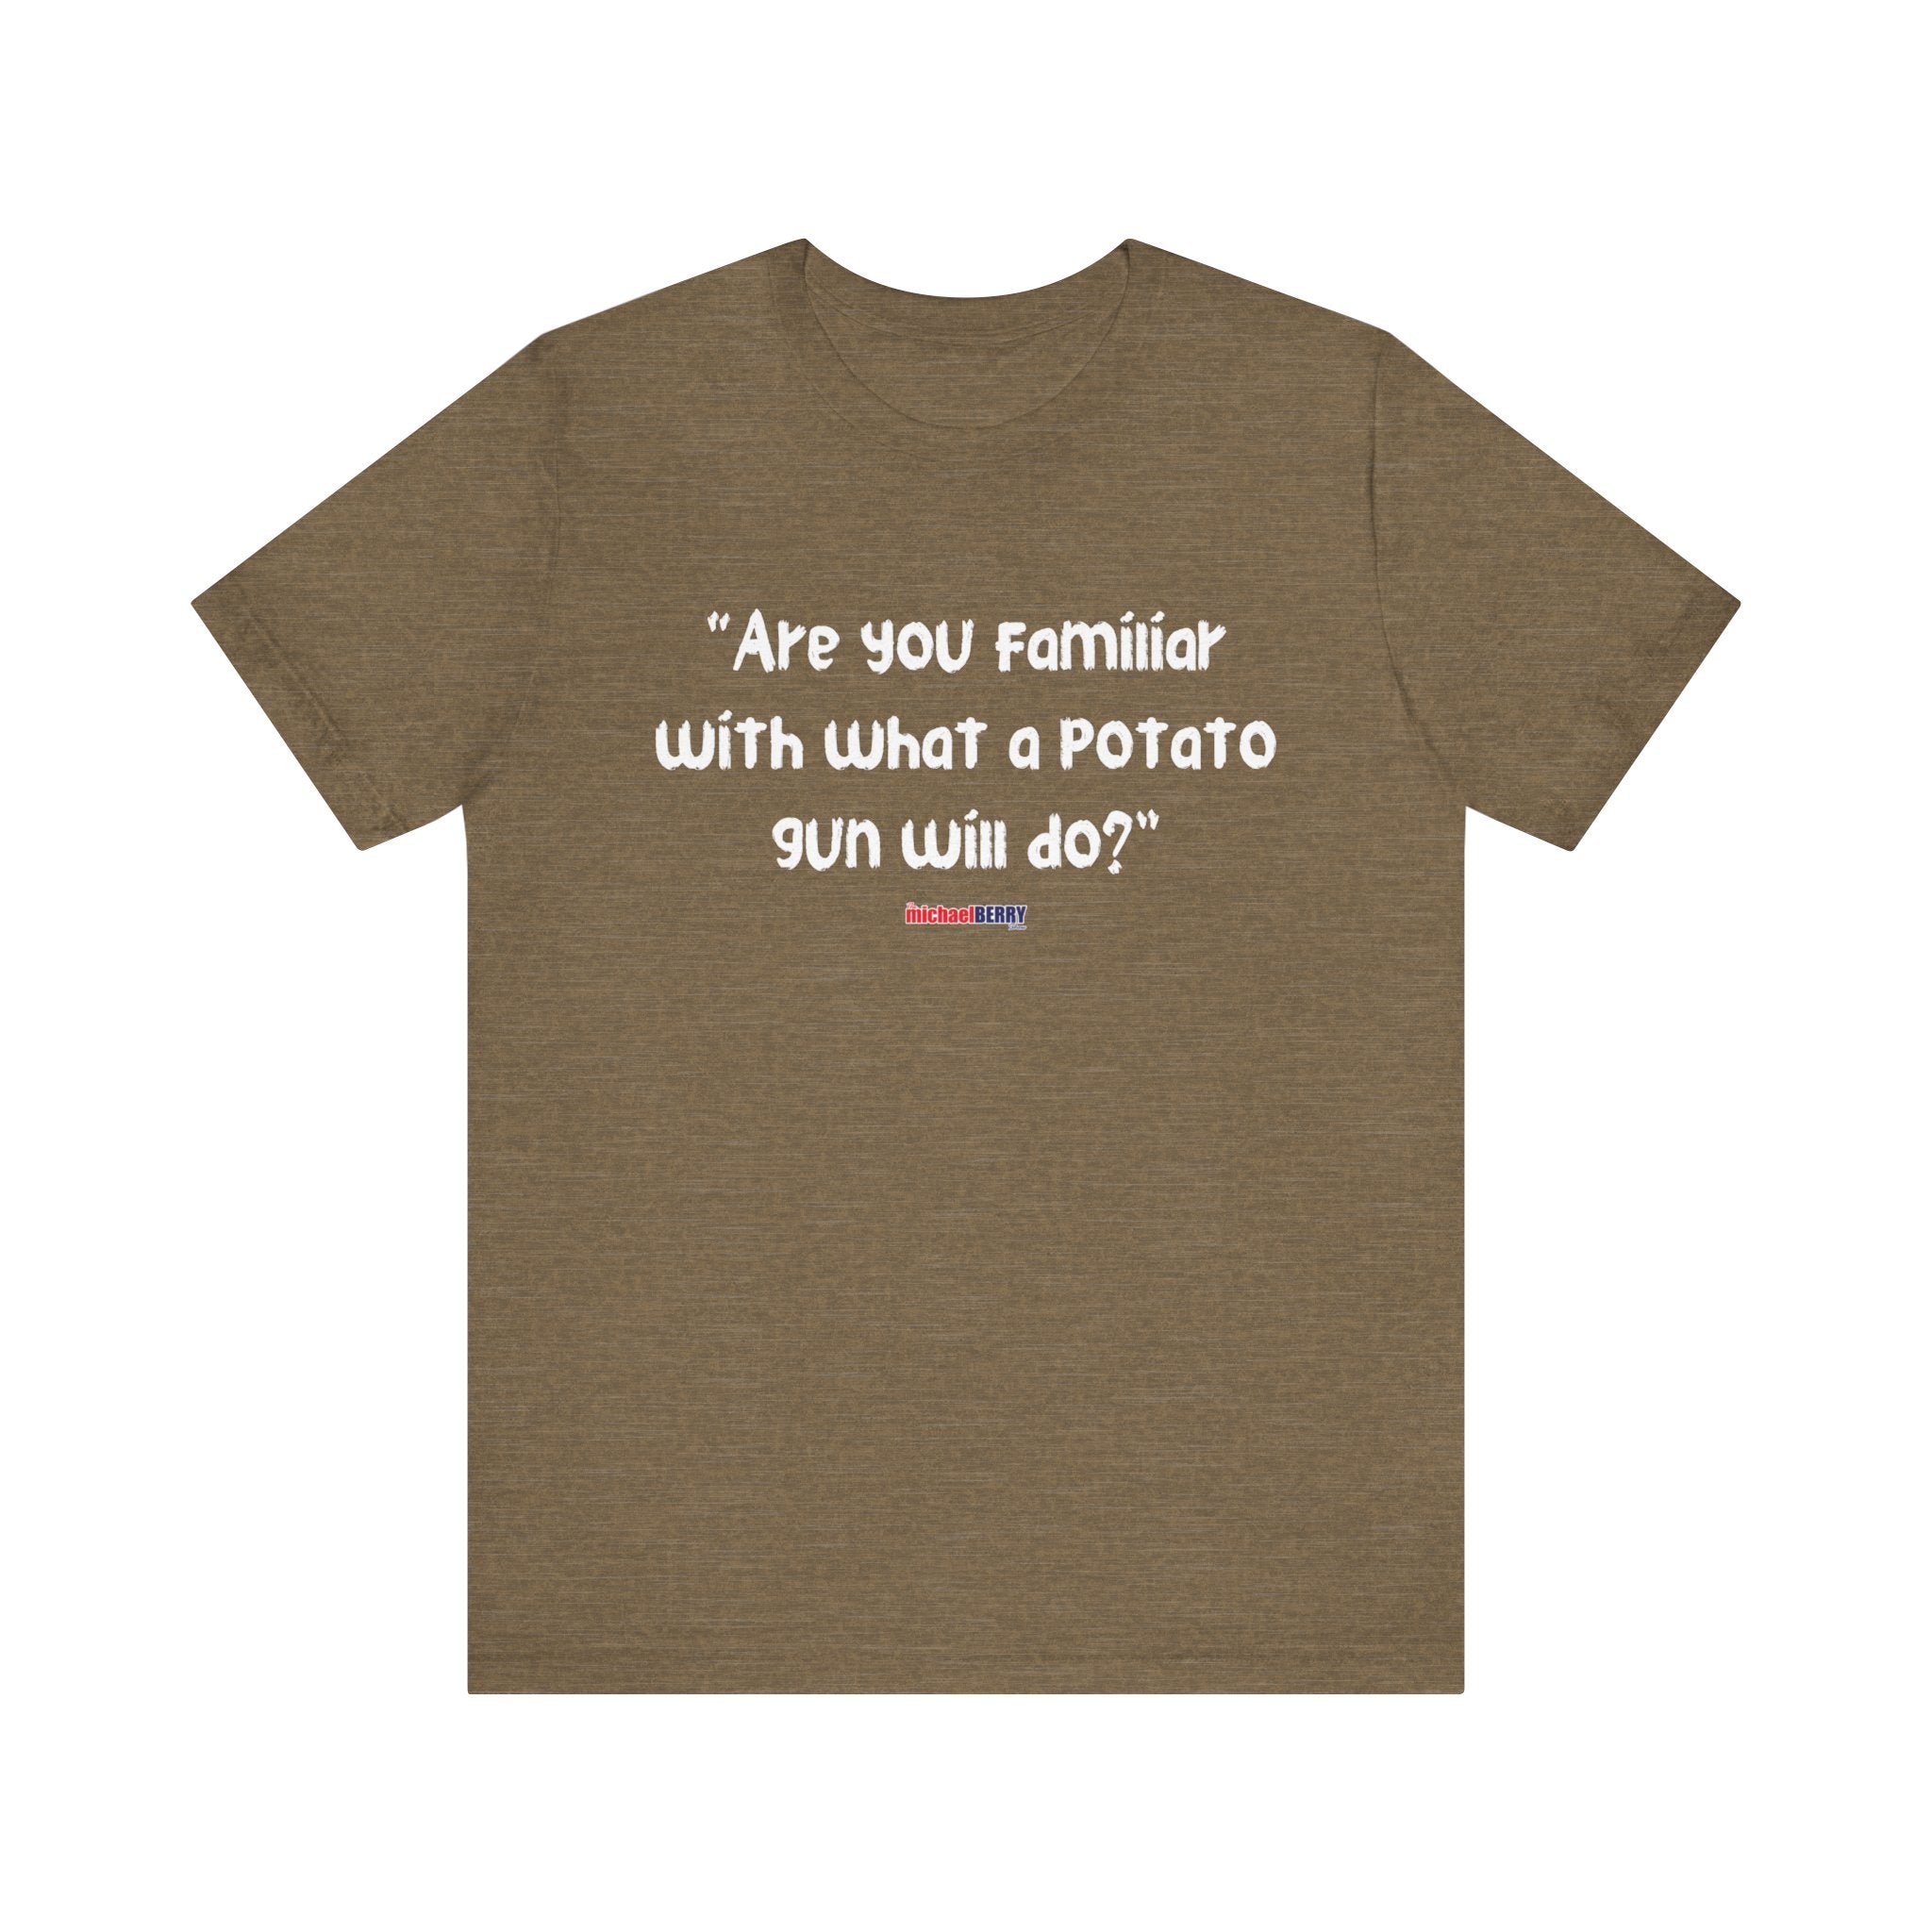 Are you familiar with what a potato gun will do? - Men's Short Sleeve Tee